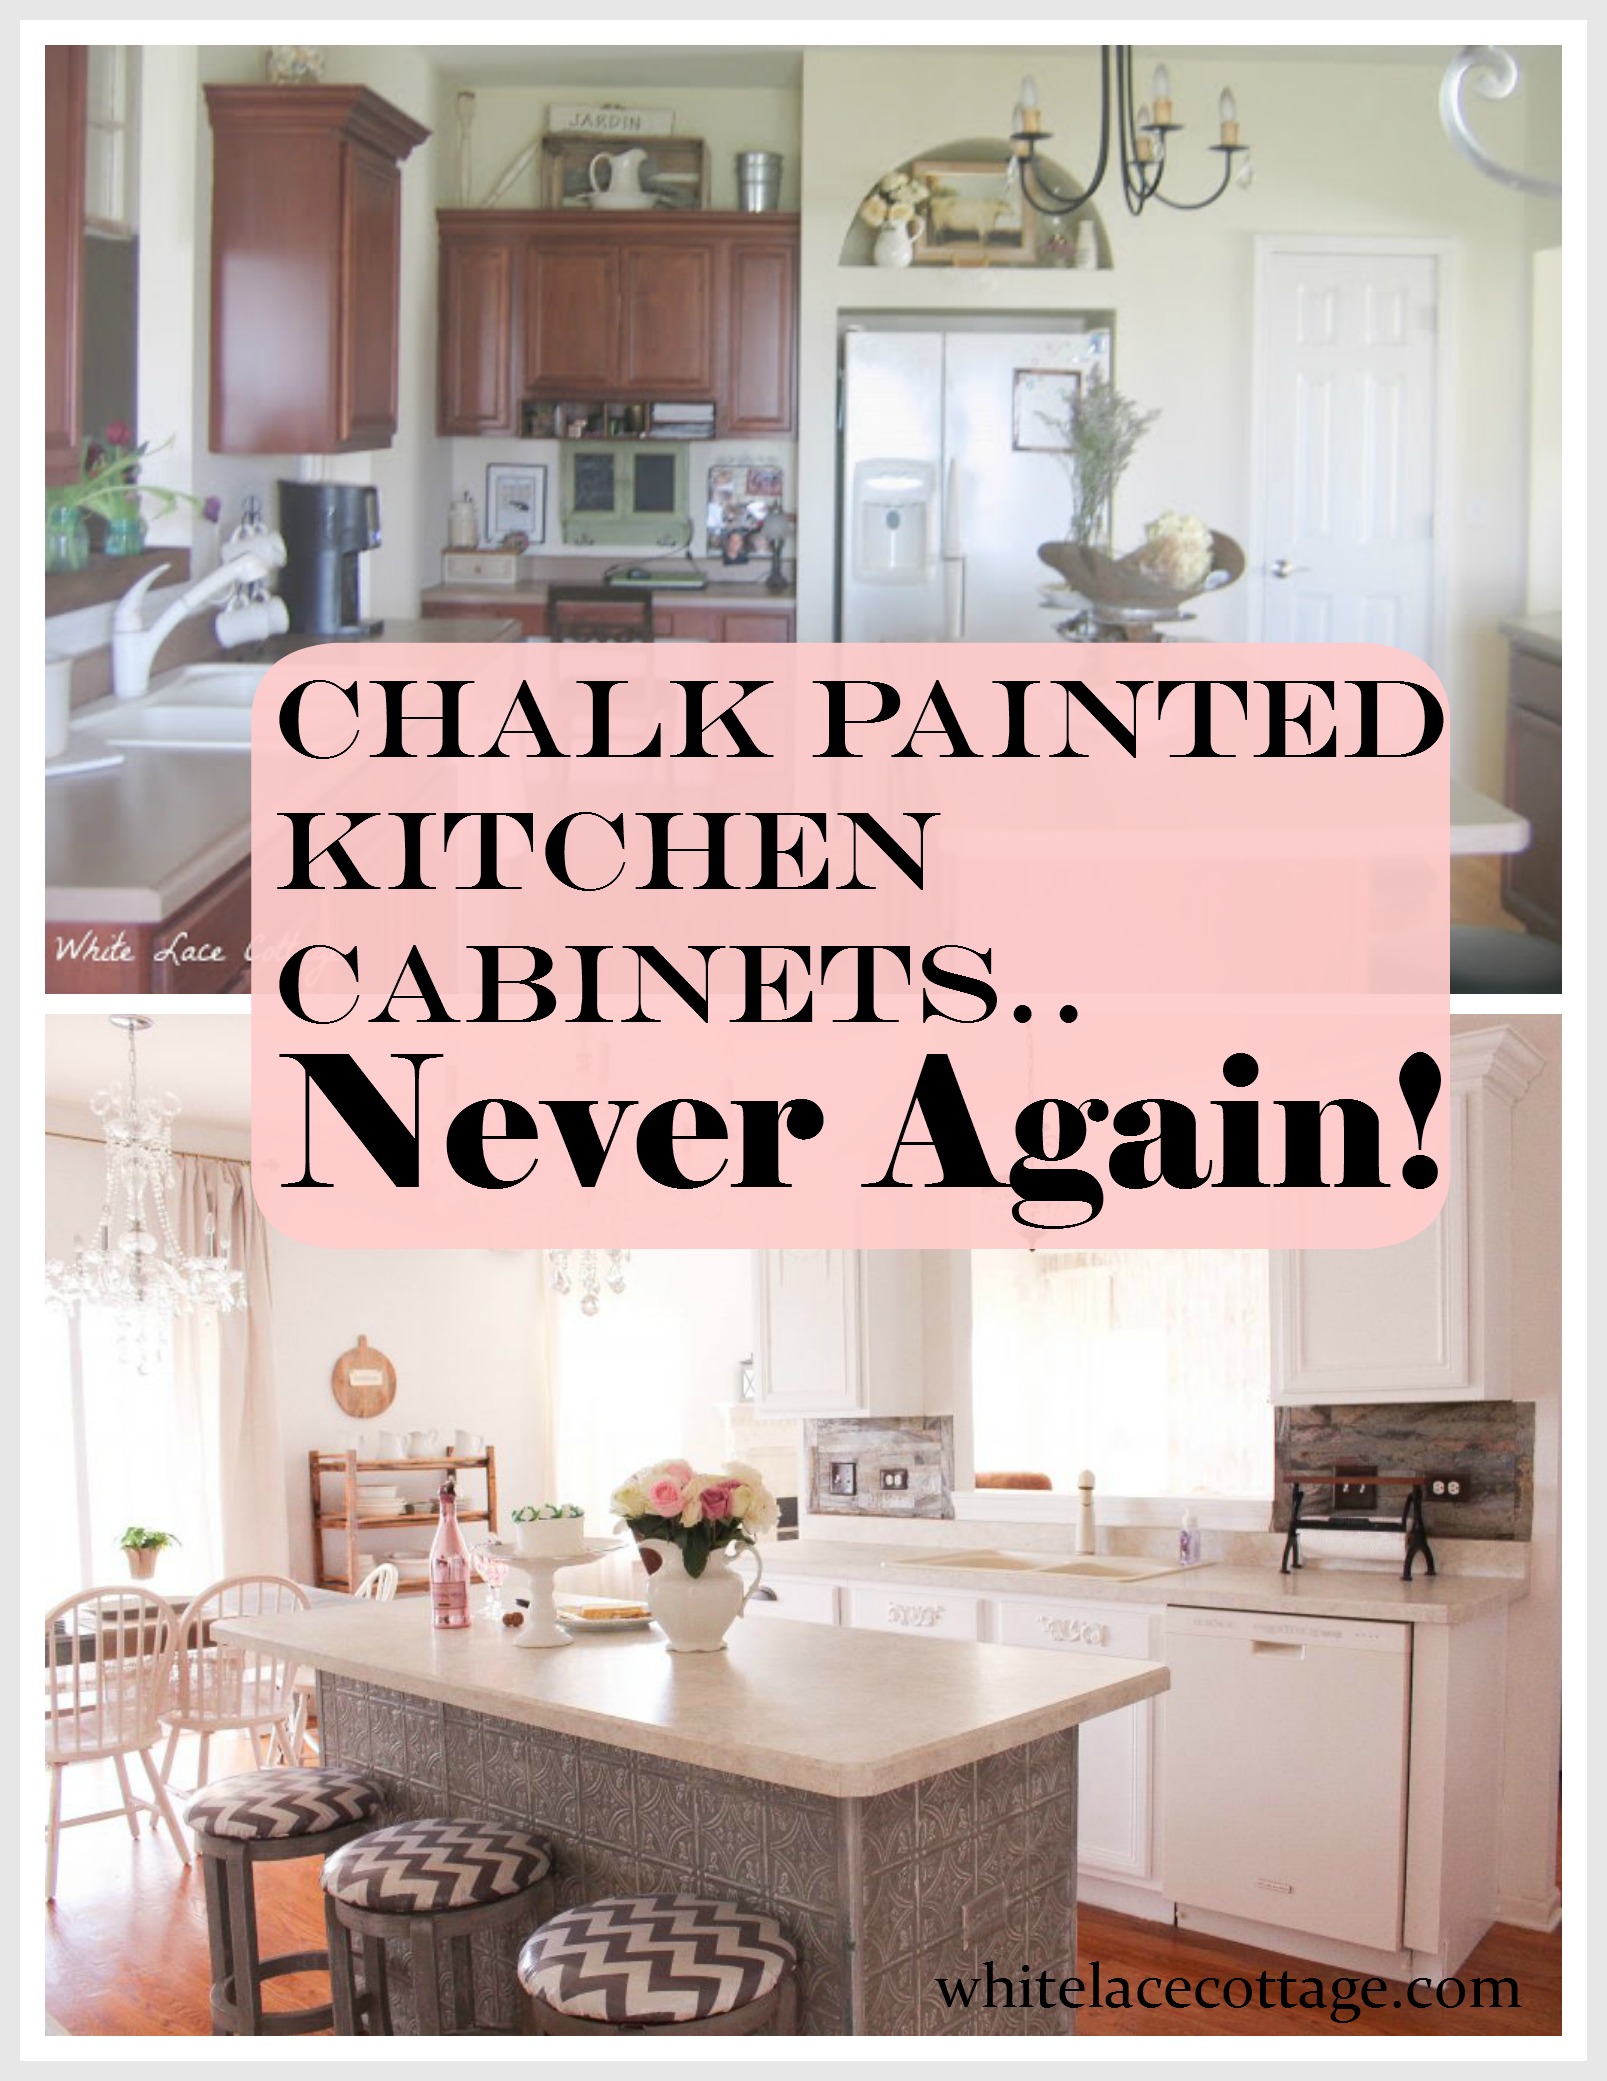 Chalk Painted Kitchen Cabinets Never Again Anne P Makeup And More,Magnolia Home Office Furniture